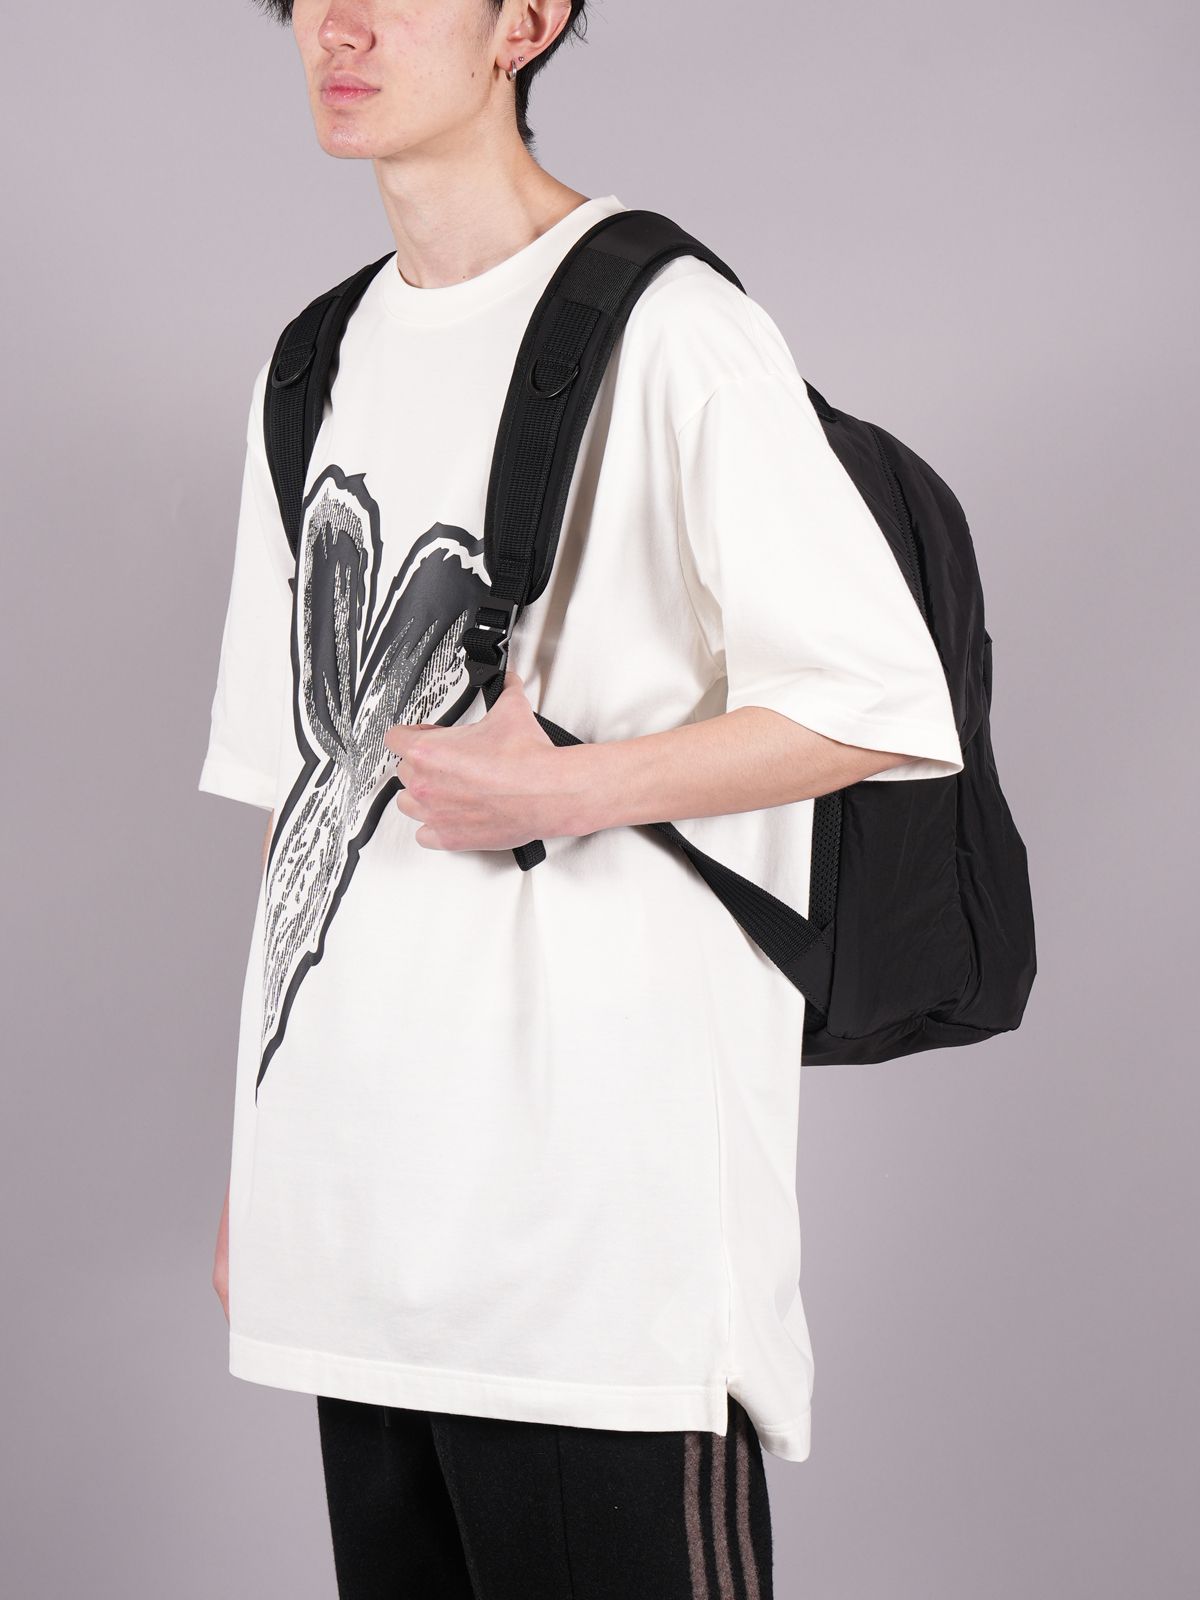 Y-3 - 【ラスト1点】 Y-3 TECH BACKPACK / ワイスリー / テックバック